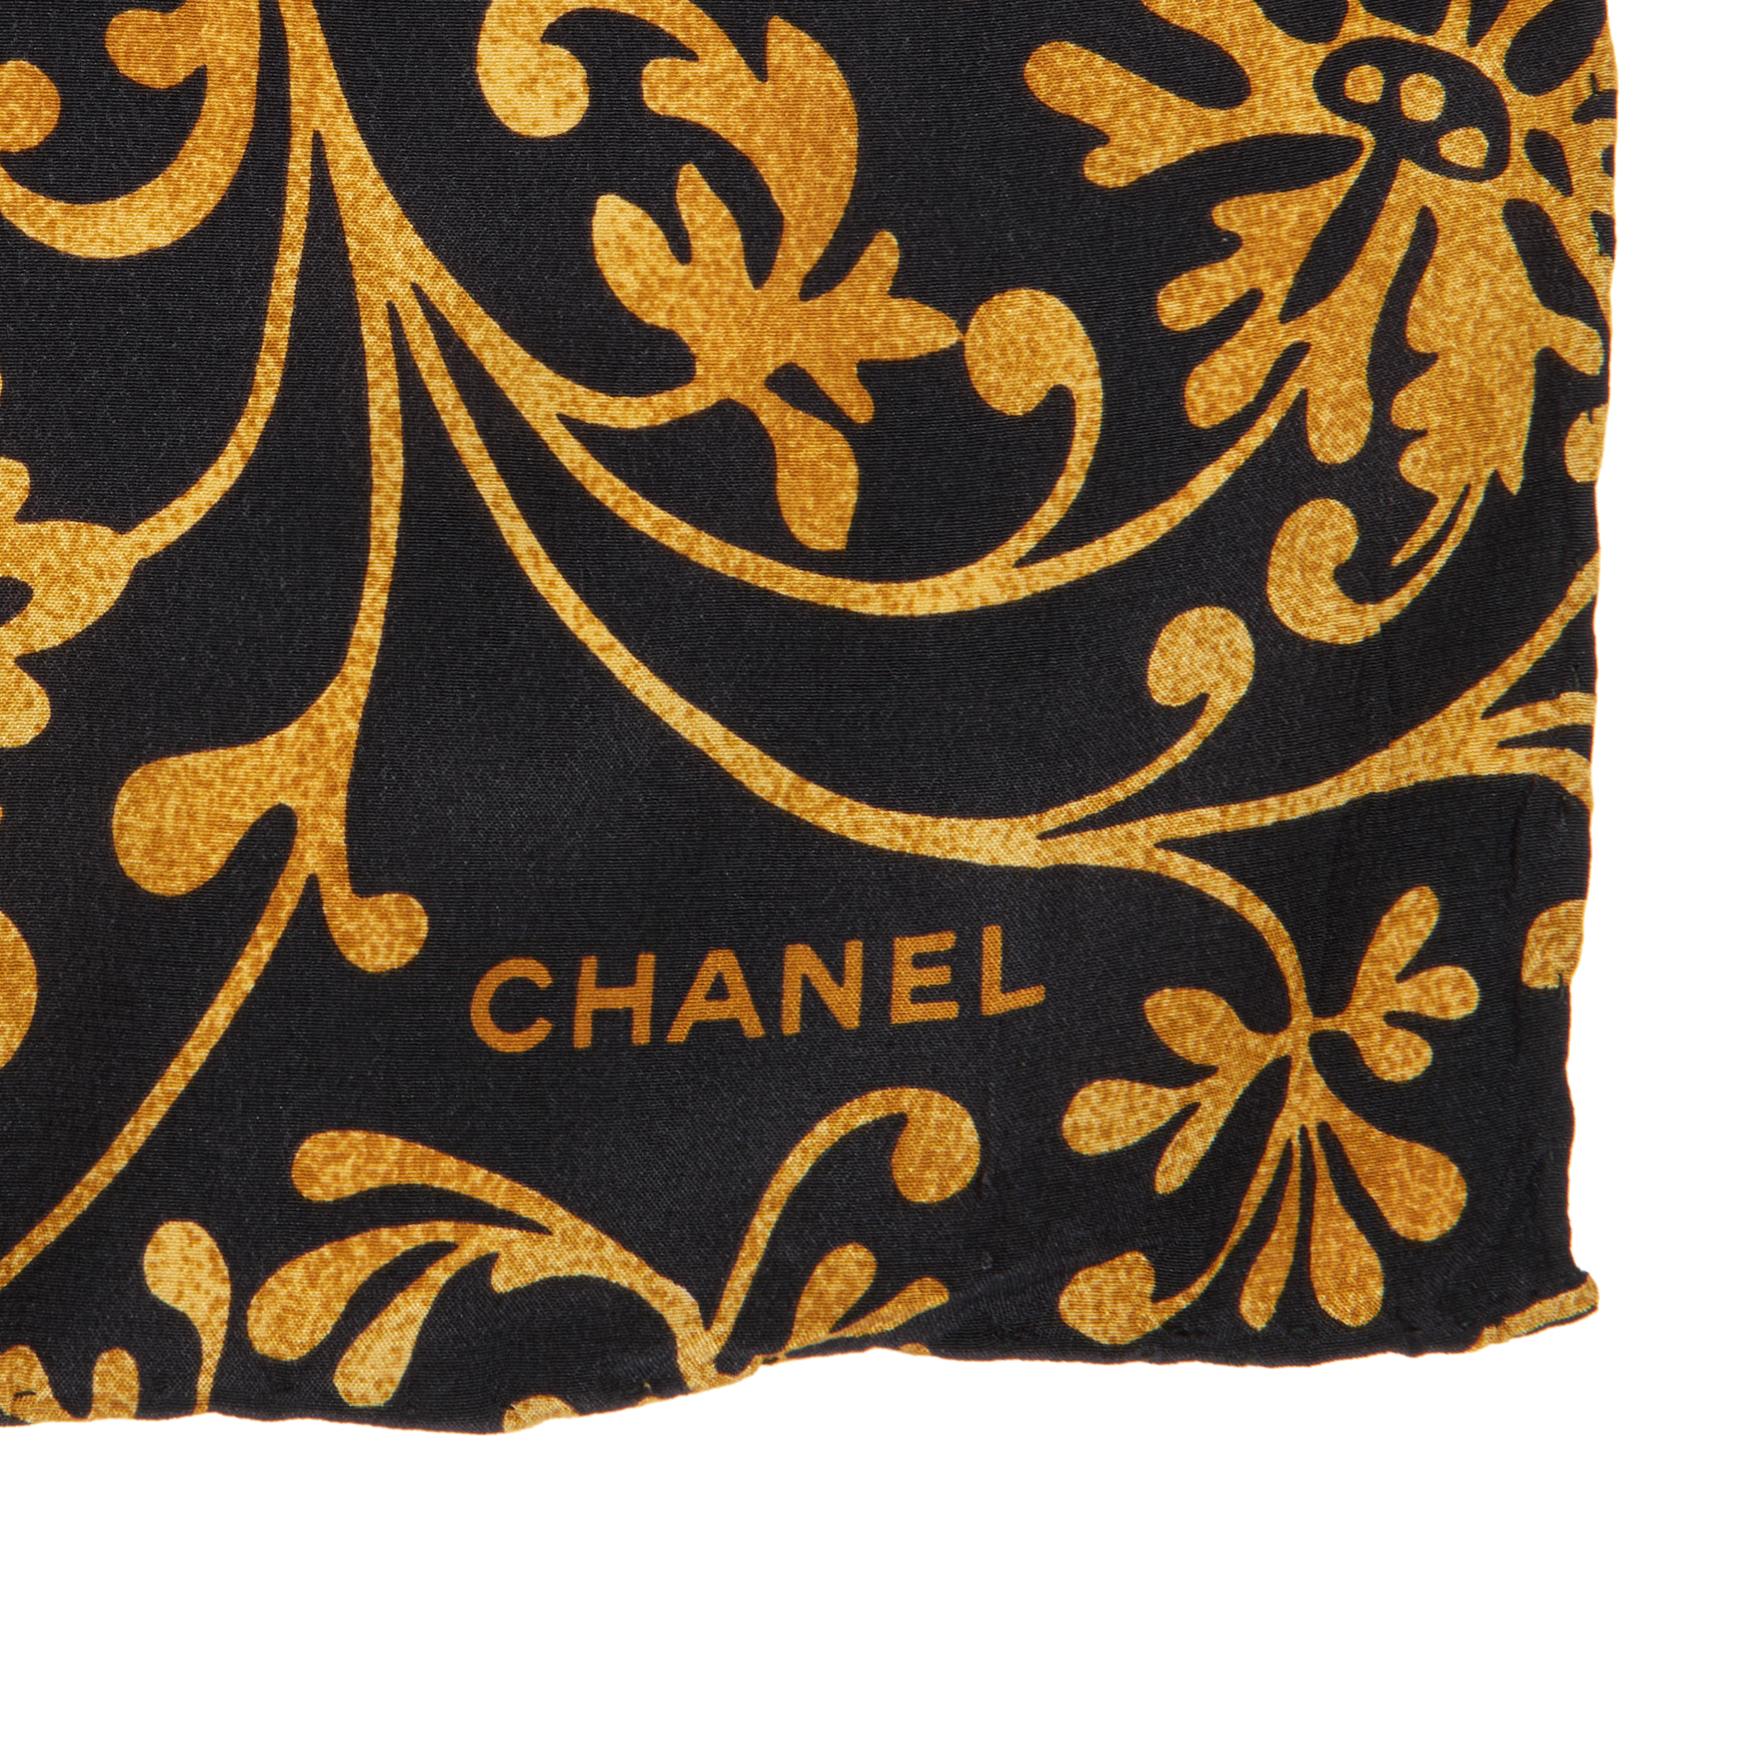 Chanel Gold Vintage CC Silk Scarf

CONDITION NOTES
The hardware is in excellent condition with light signs of use.
Overall this item is in excellent pre-owned condition. Please note the majority of the items we sell are pre-loved unless stated